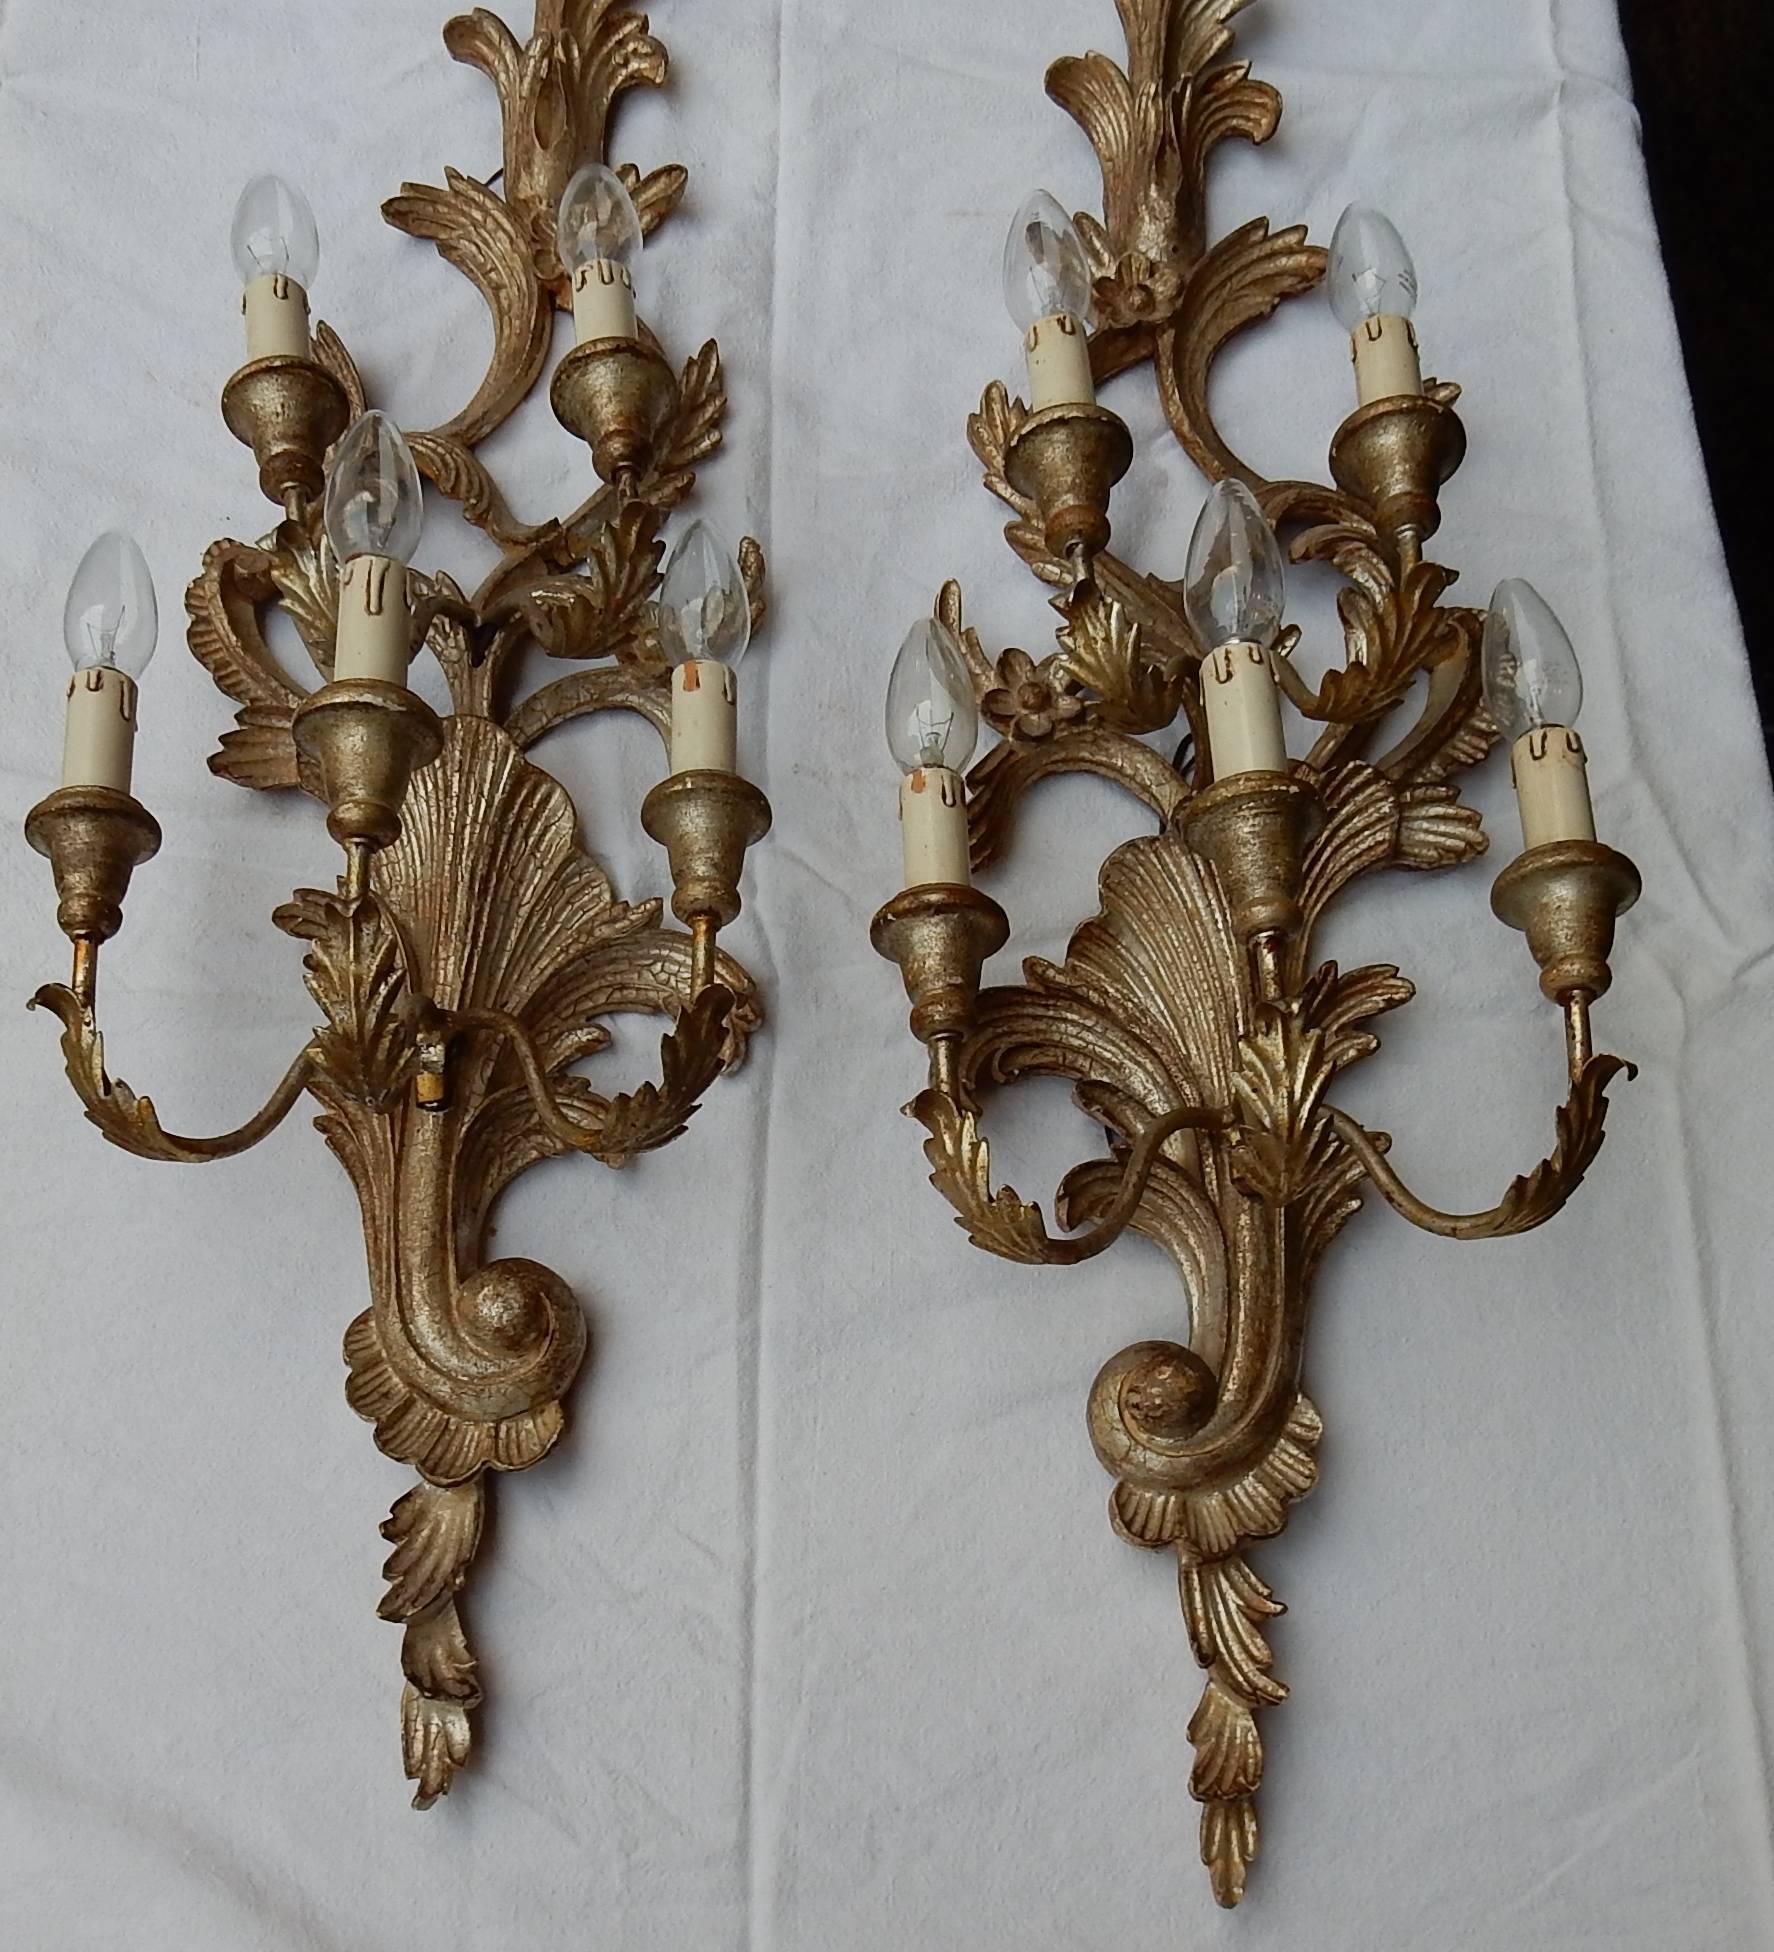 Pair of silvered wooden wall lamps, five bulbs,circa 1950s to 1970s, good condition